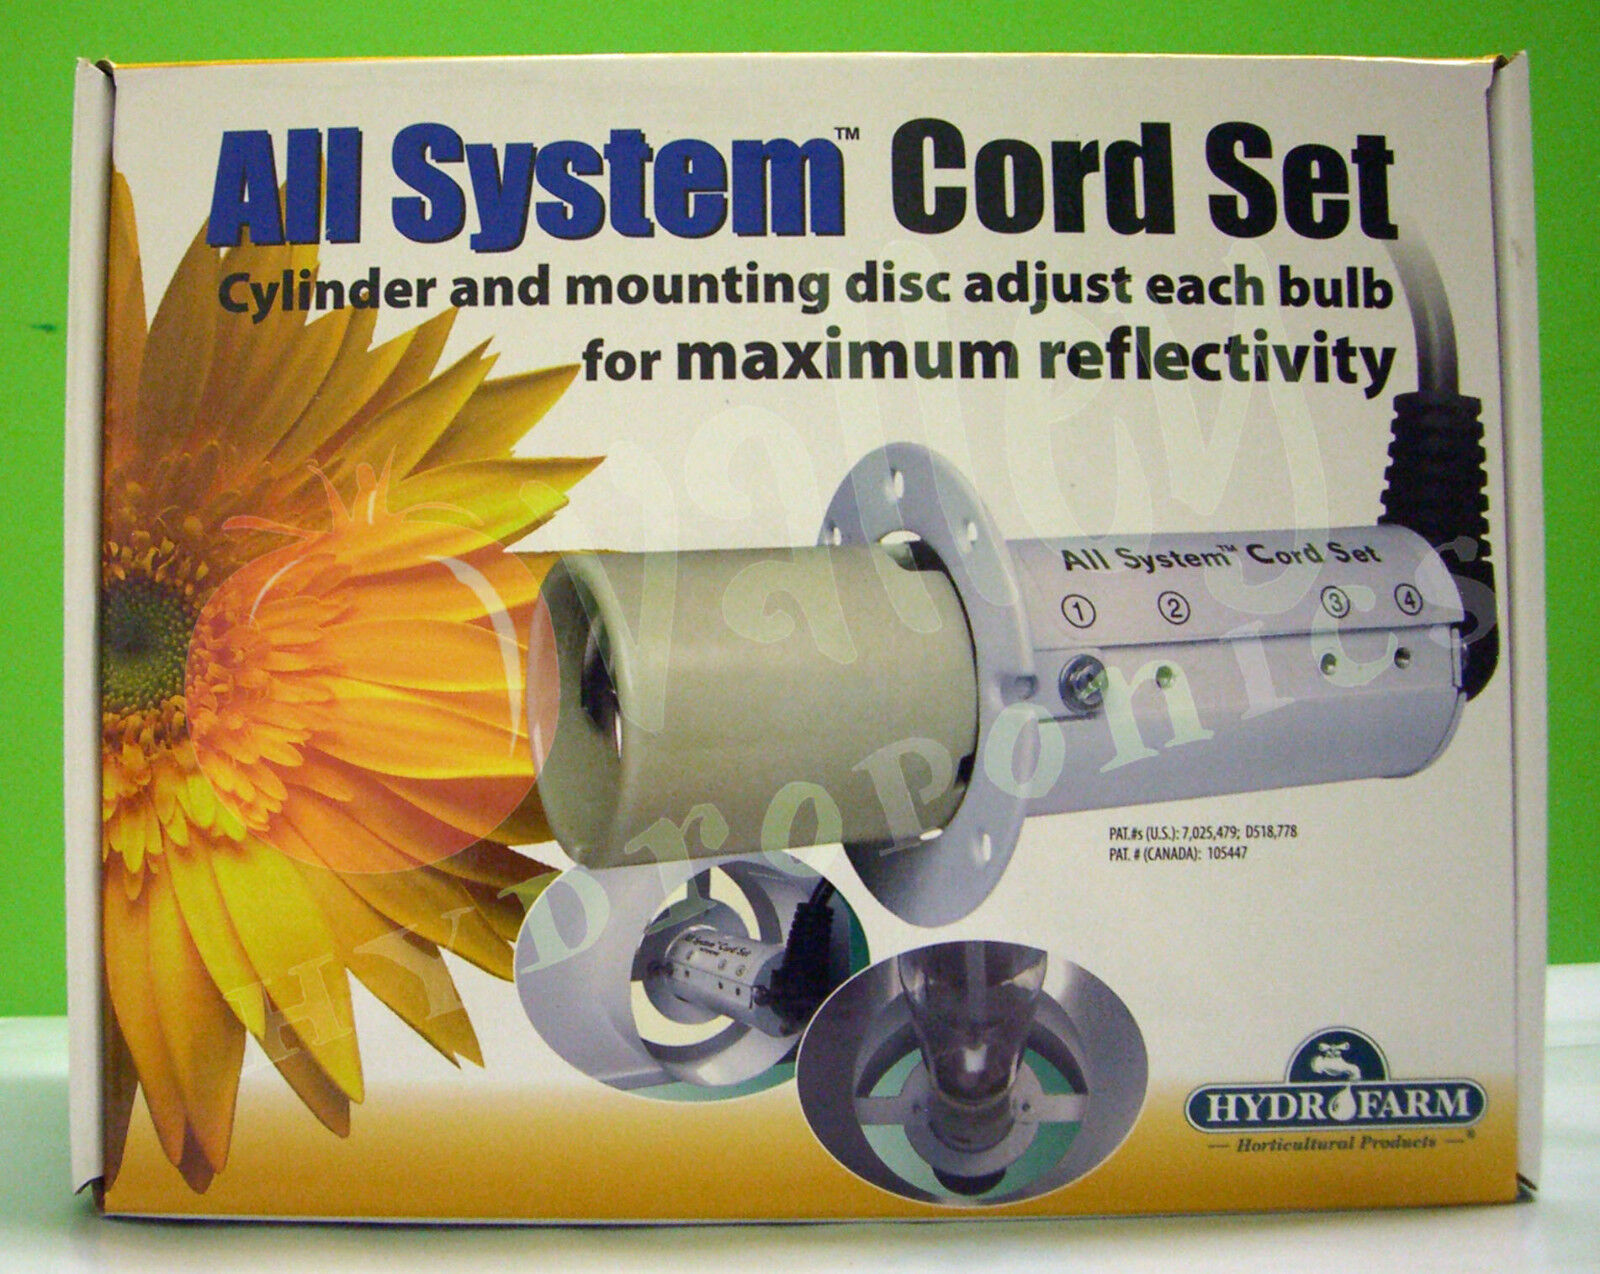 Hydrofarm ALL SYSTEM CORD SET with 15' ft Cord Socket Grow Light Wing Reflector